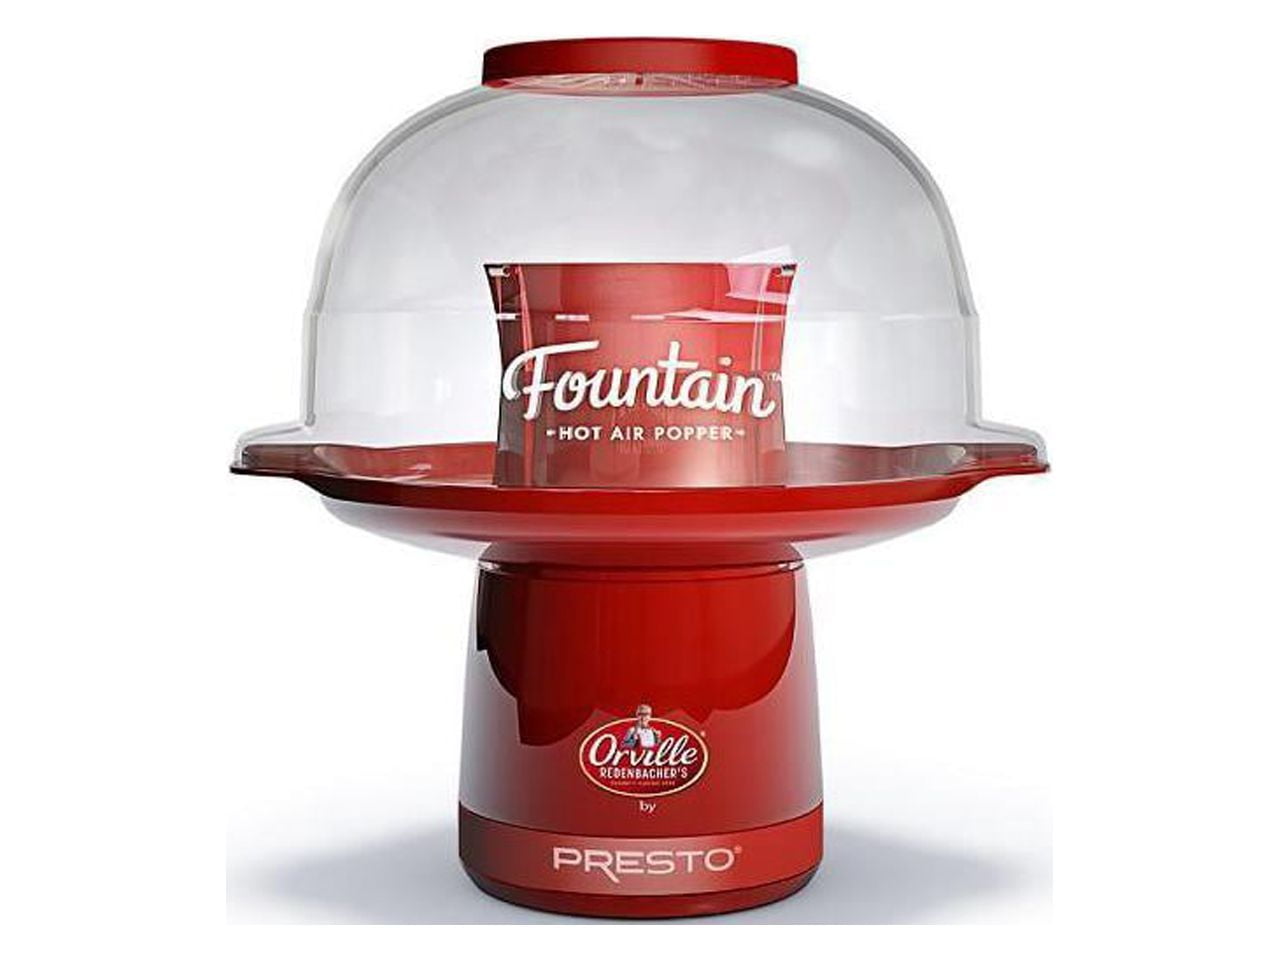 Orville Redenbacher's Fountain Hot Air Popper by Presto 04868 Red  10-20 Cups